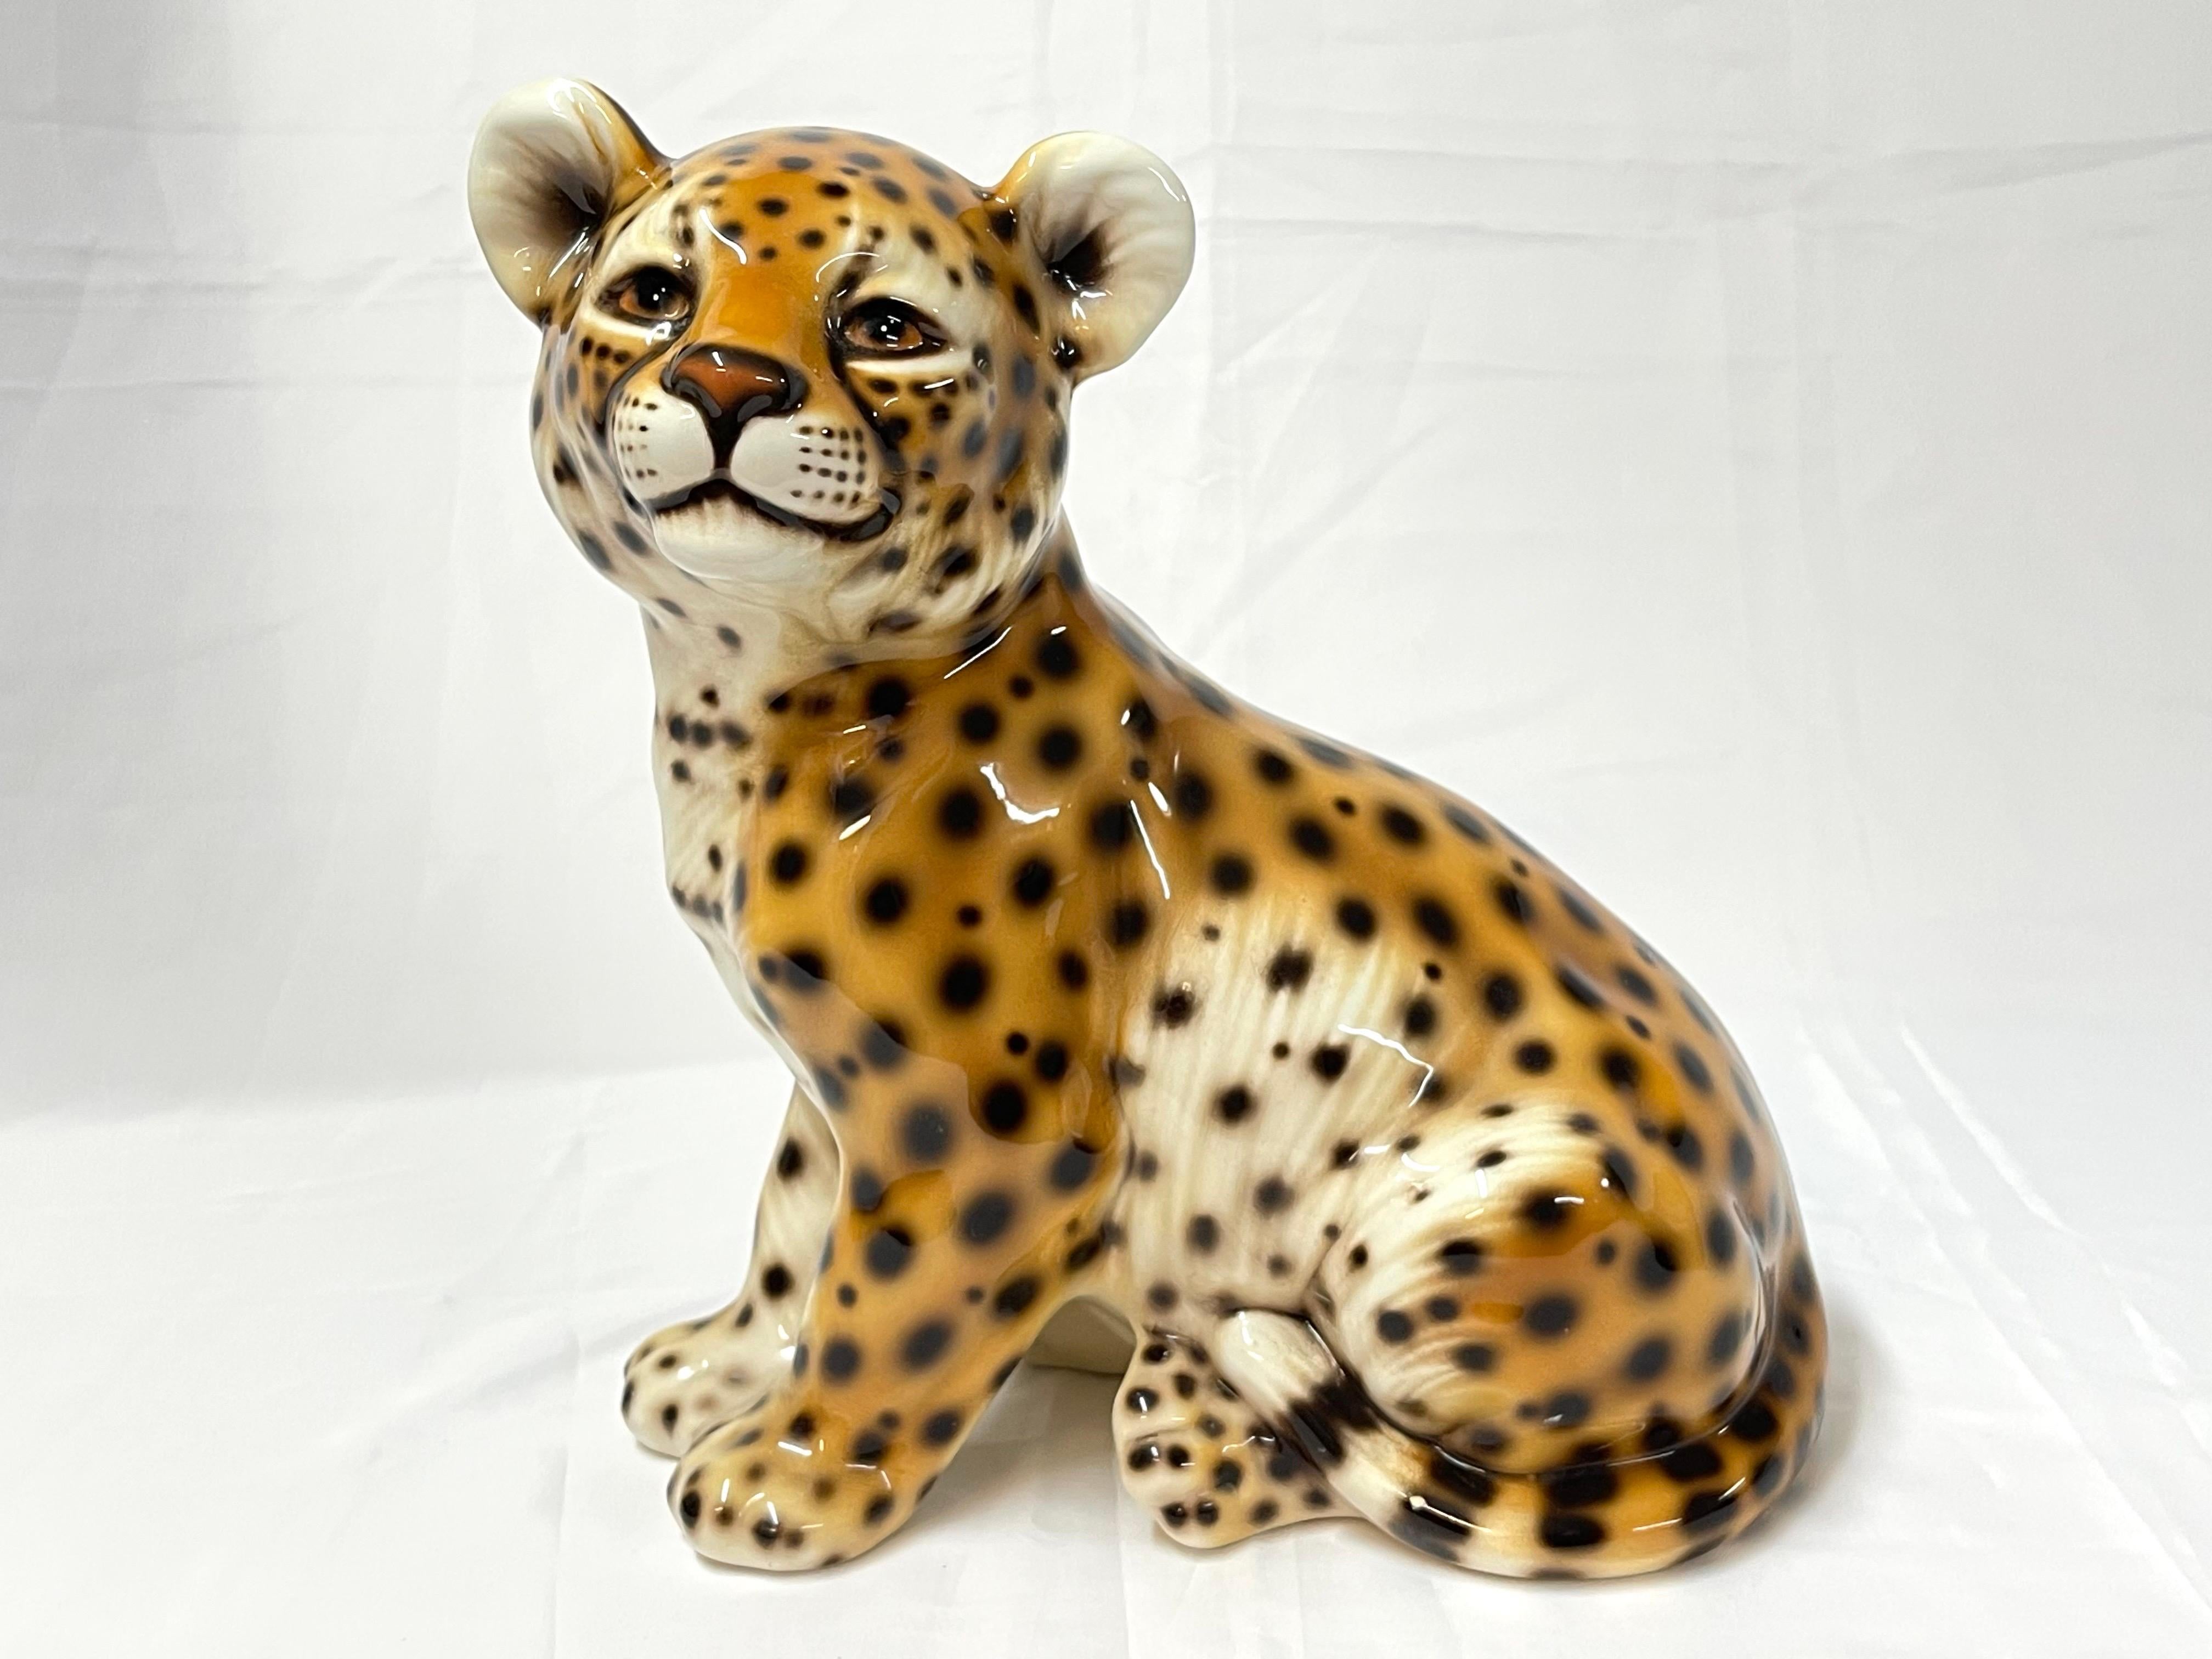 1970's Italian Ceramic Baby Leopard Sculpture. Made in Italy . Collectible and decorative. 